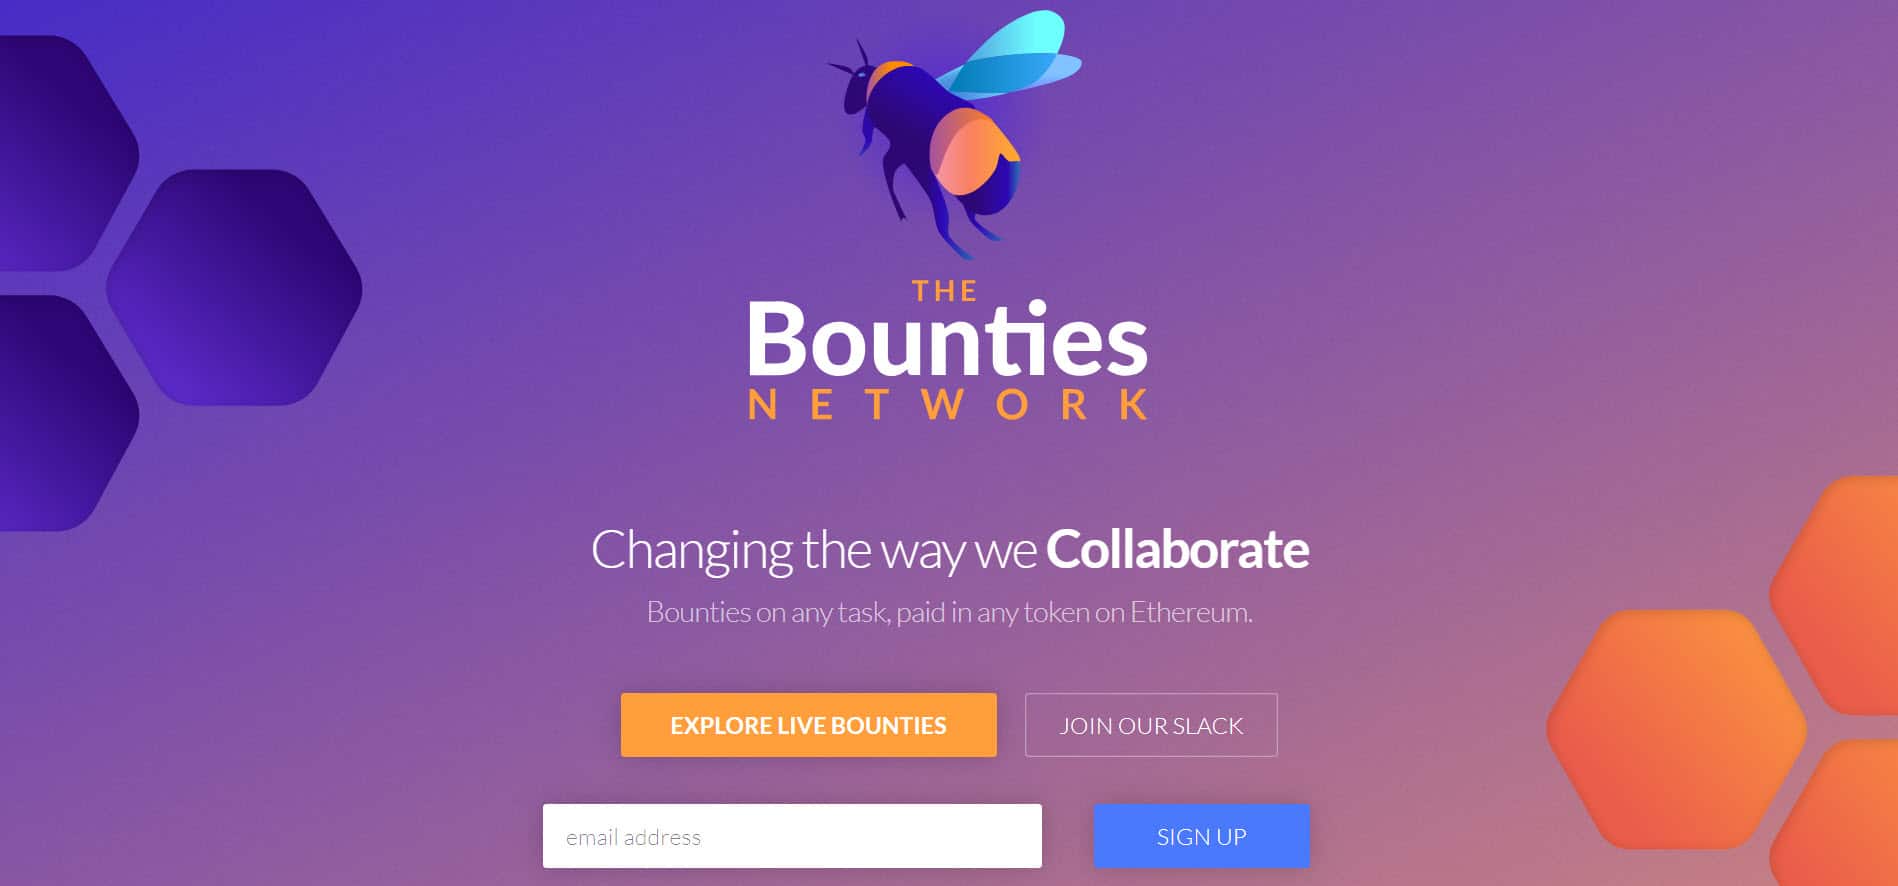 The Bounties Network